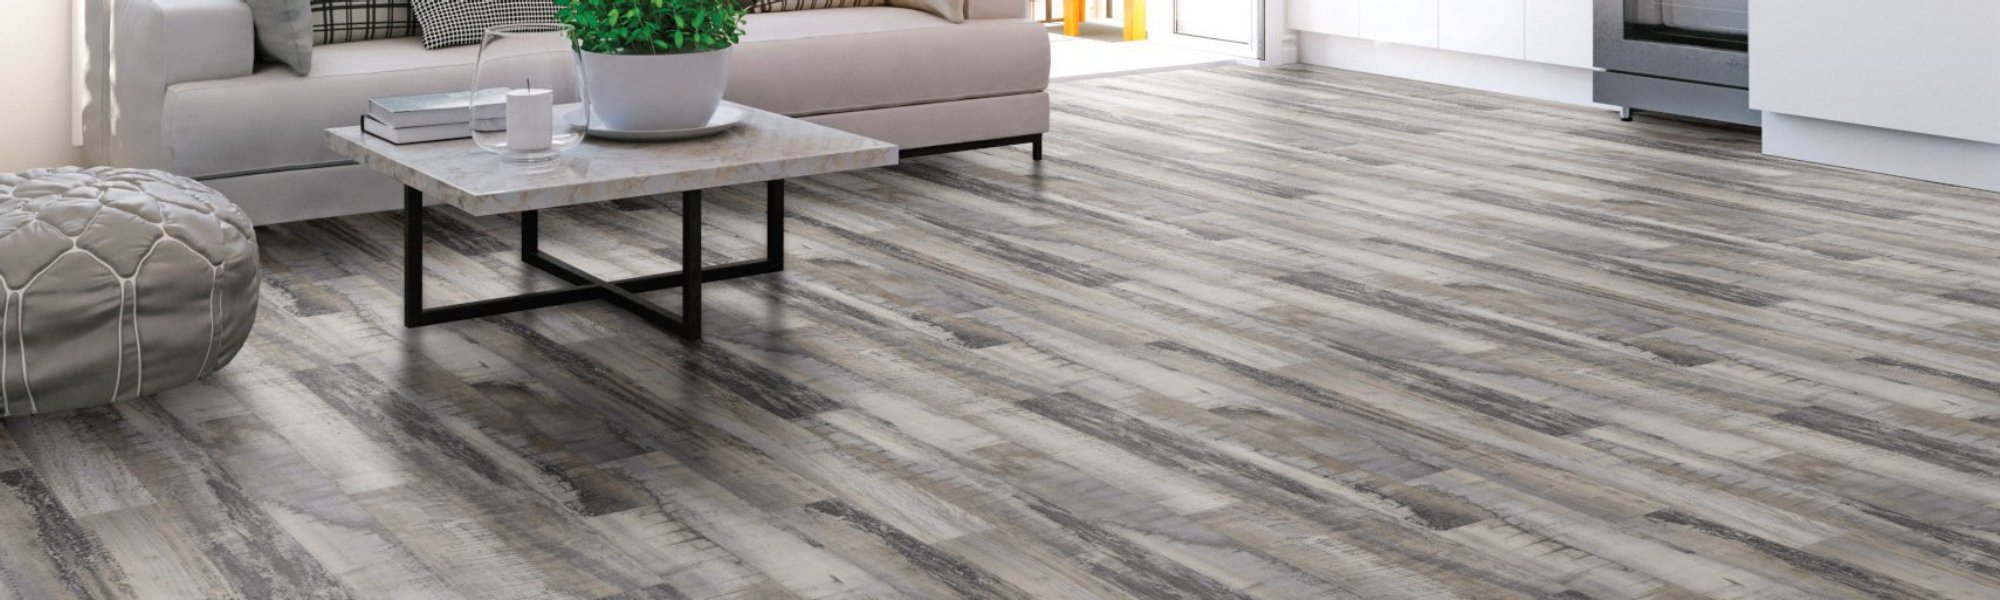 Product Articles Header Showing Laminate Flooring In A Living Room